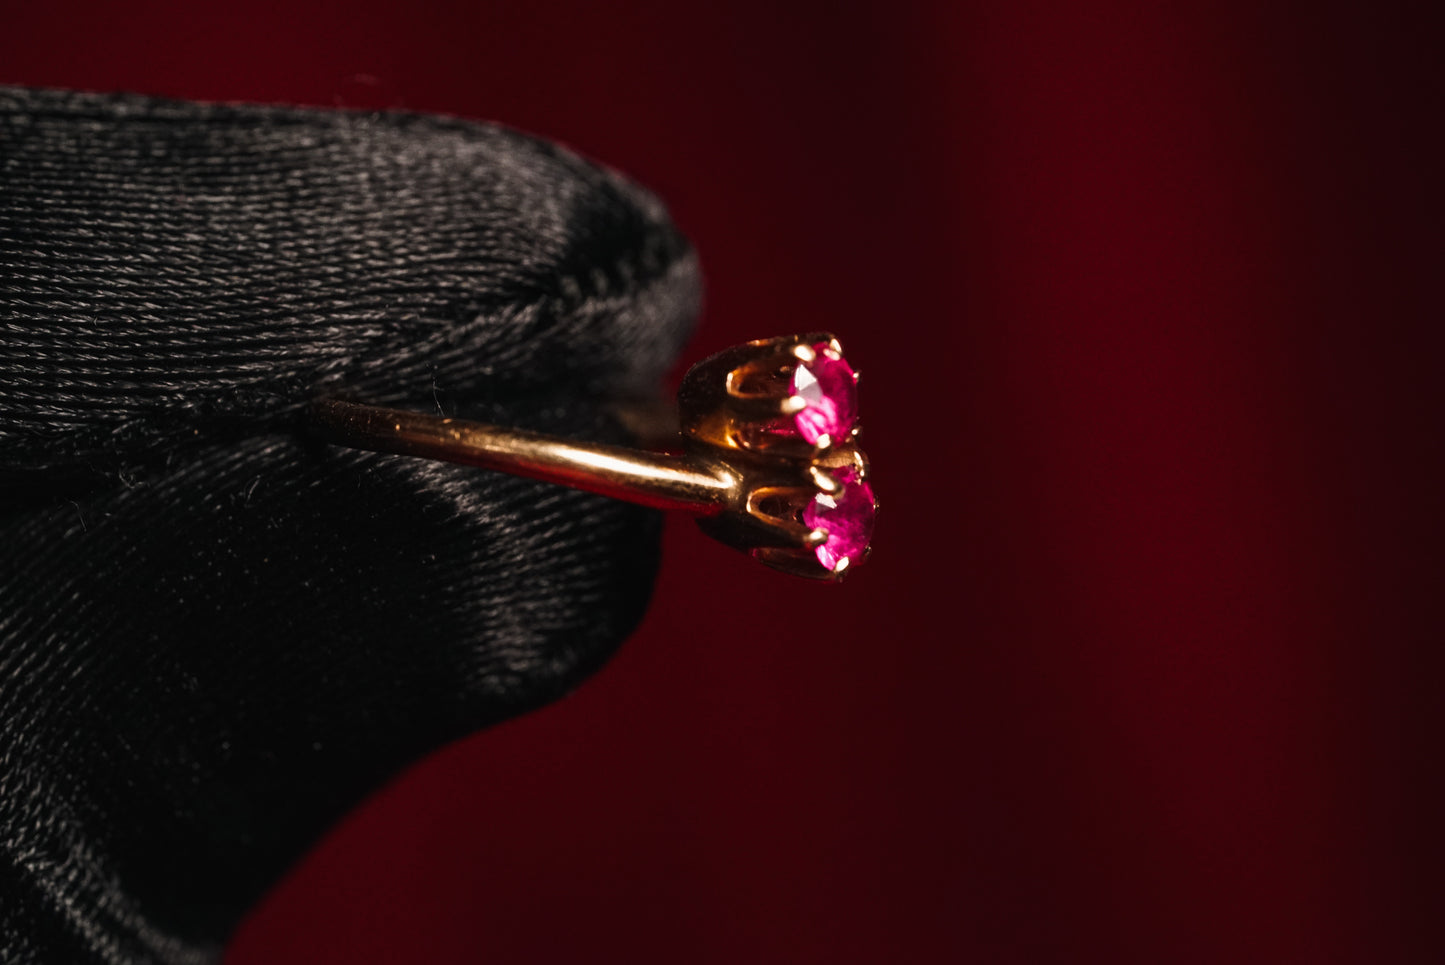 Sweet Pinky Ruby Ring